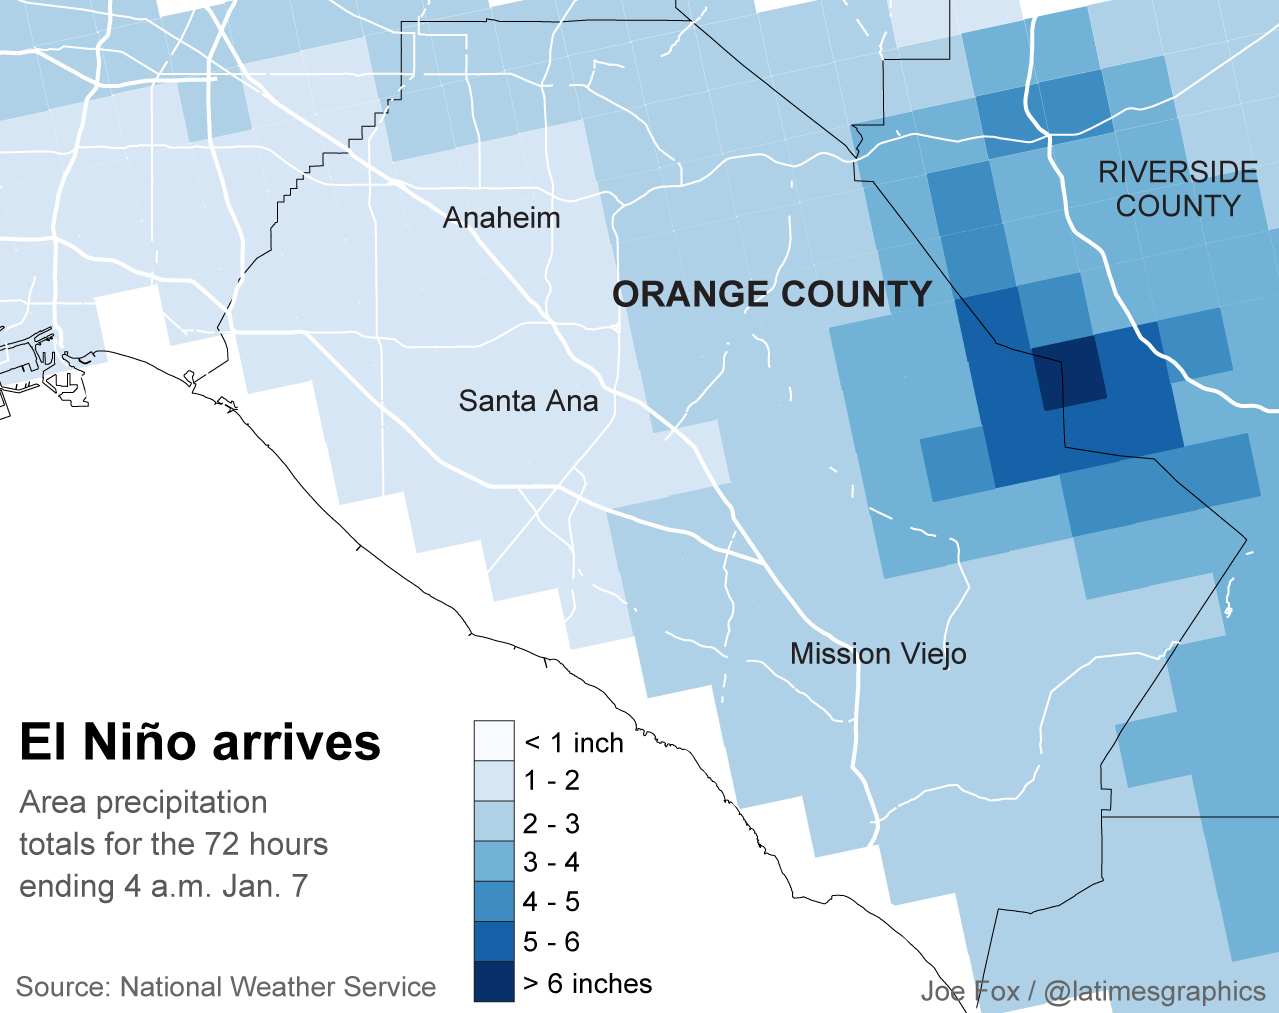 Rainfall in Orange County. (Los Angeles Times)